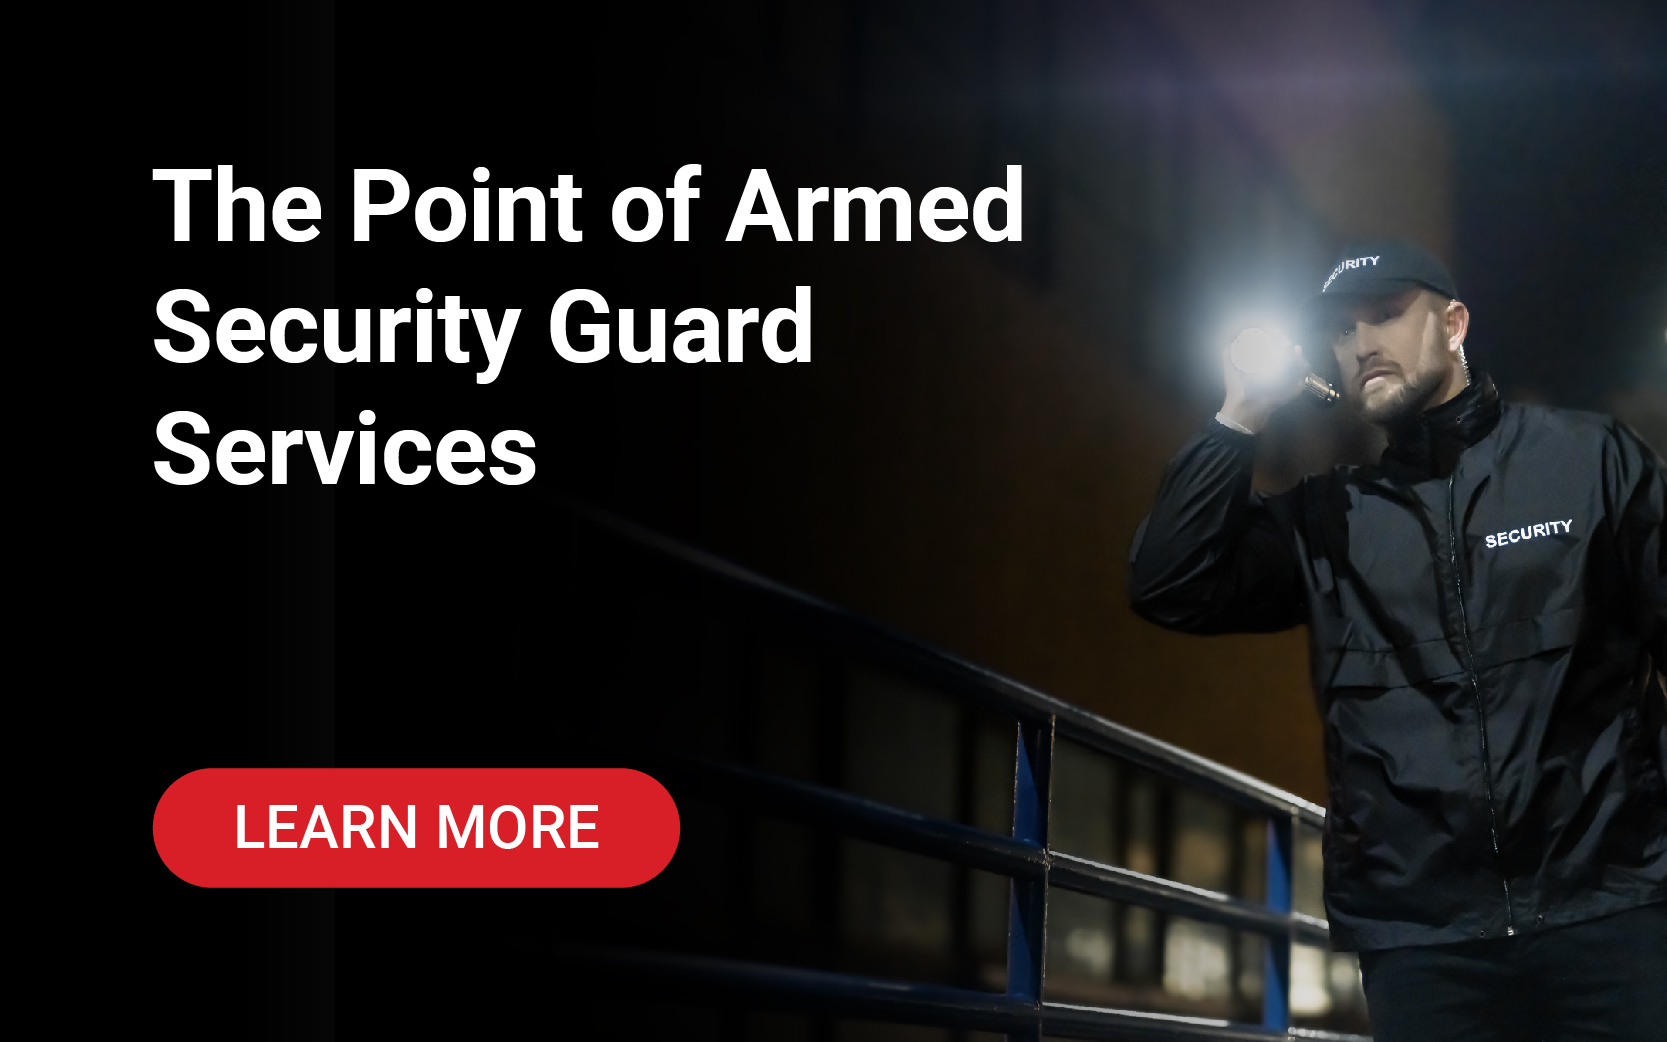 What situations really demand armed security guard services? Learn why you might need the extra edge in your security here with PEAK Alarm.